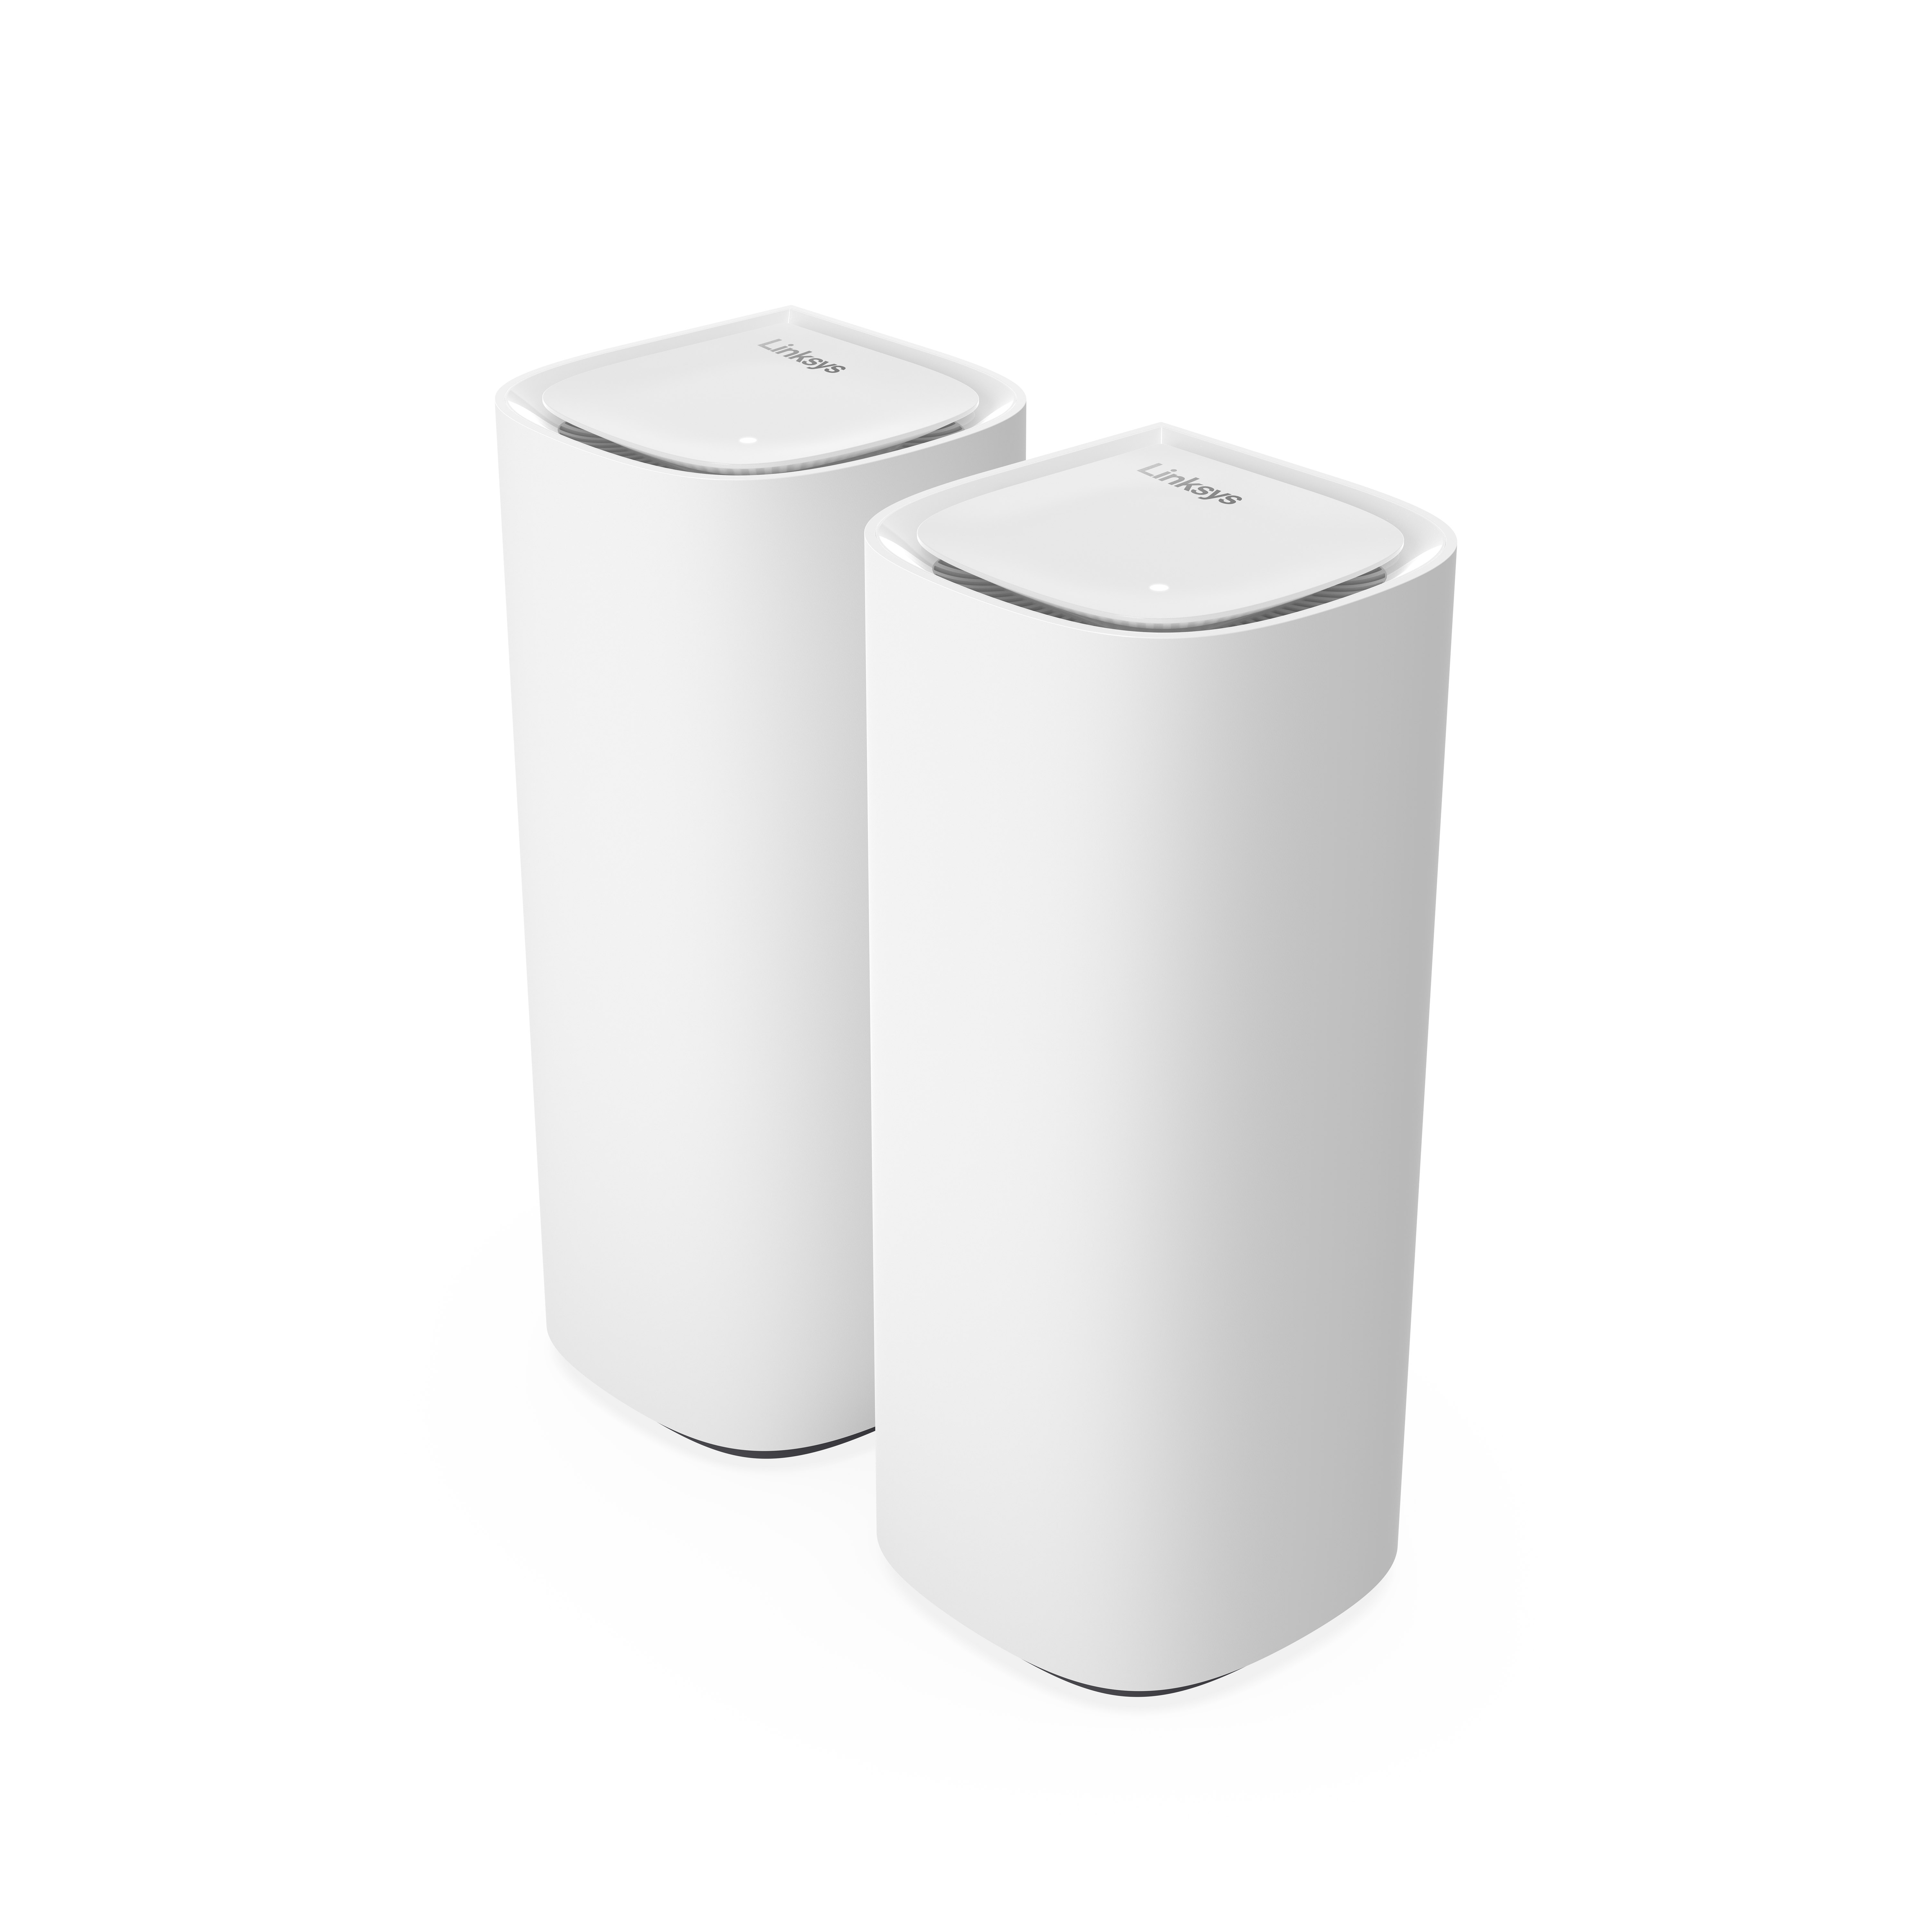 Velop Pro 7 MBE7002 Tri-Band Mesh WiFi 7 Router, 2-Pack